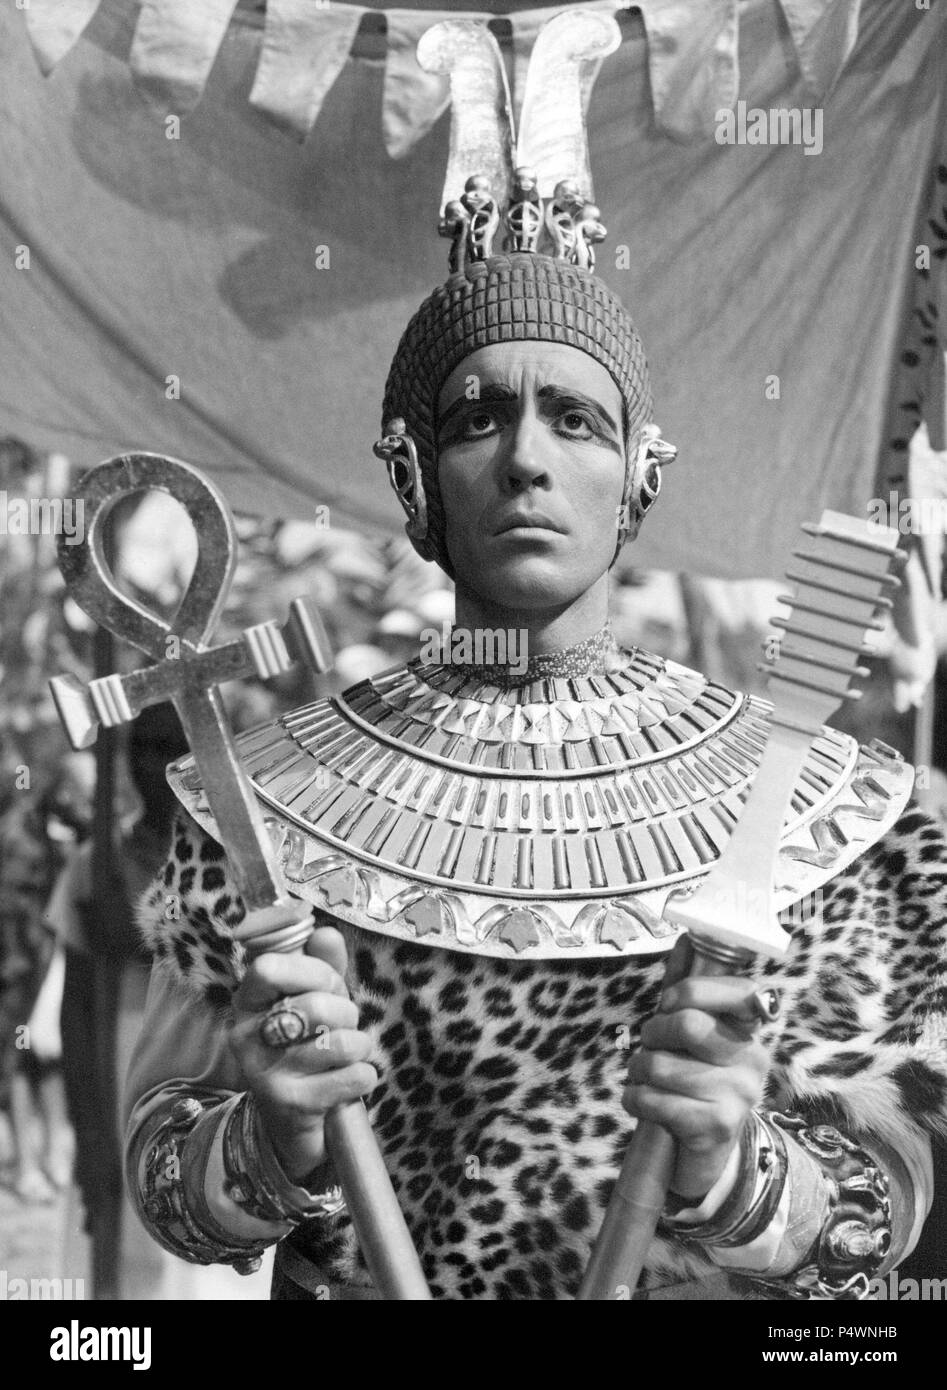 Original Film Title: THE MUMMY.  English Title: THE MUMMY.  Film Director: TERENCE FISHER.  Year: 1959.  Stars: CHRISTOPHER LEE. Credit: HAMMER / Album Stock Photo